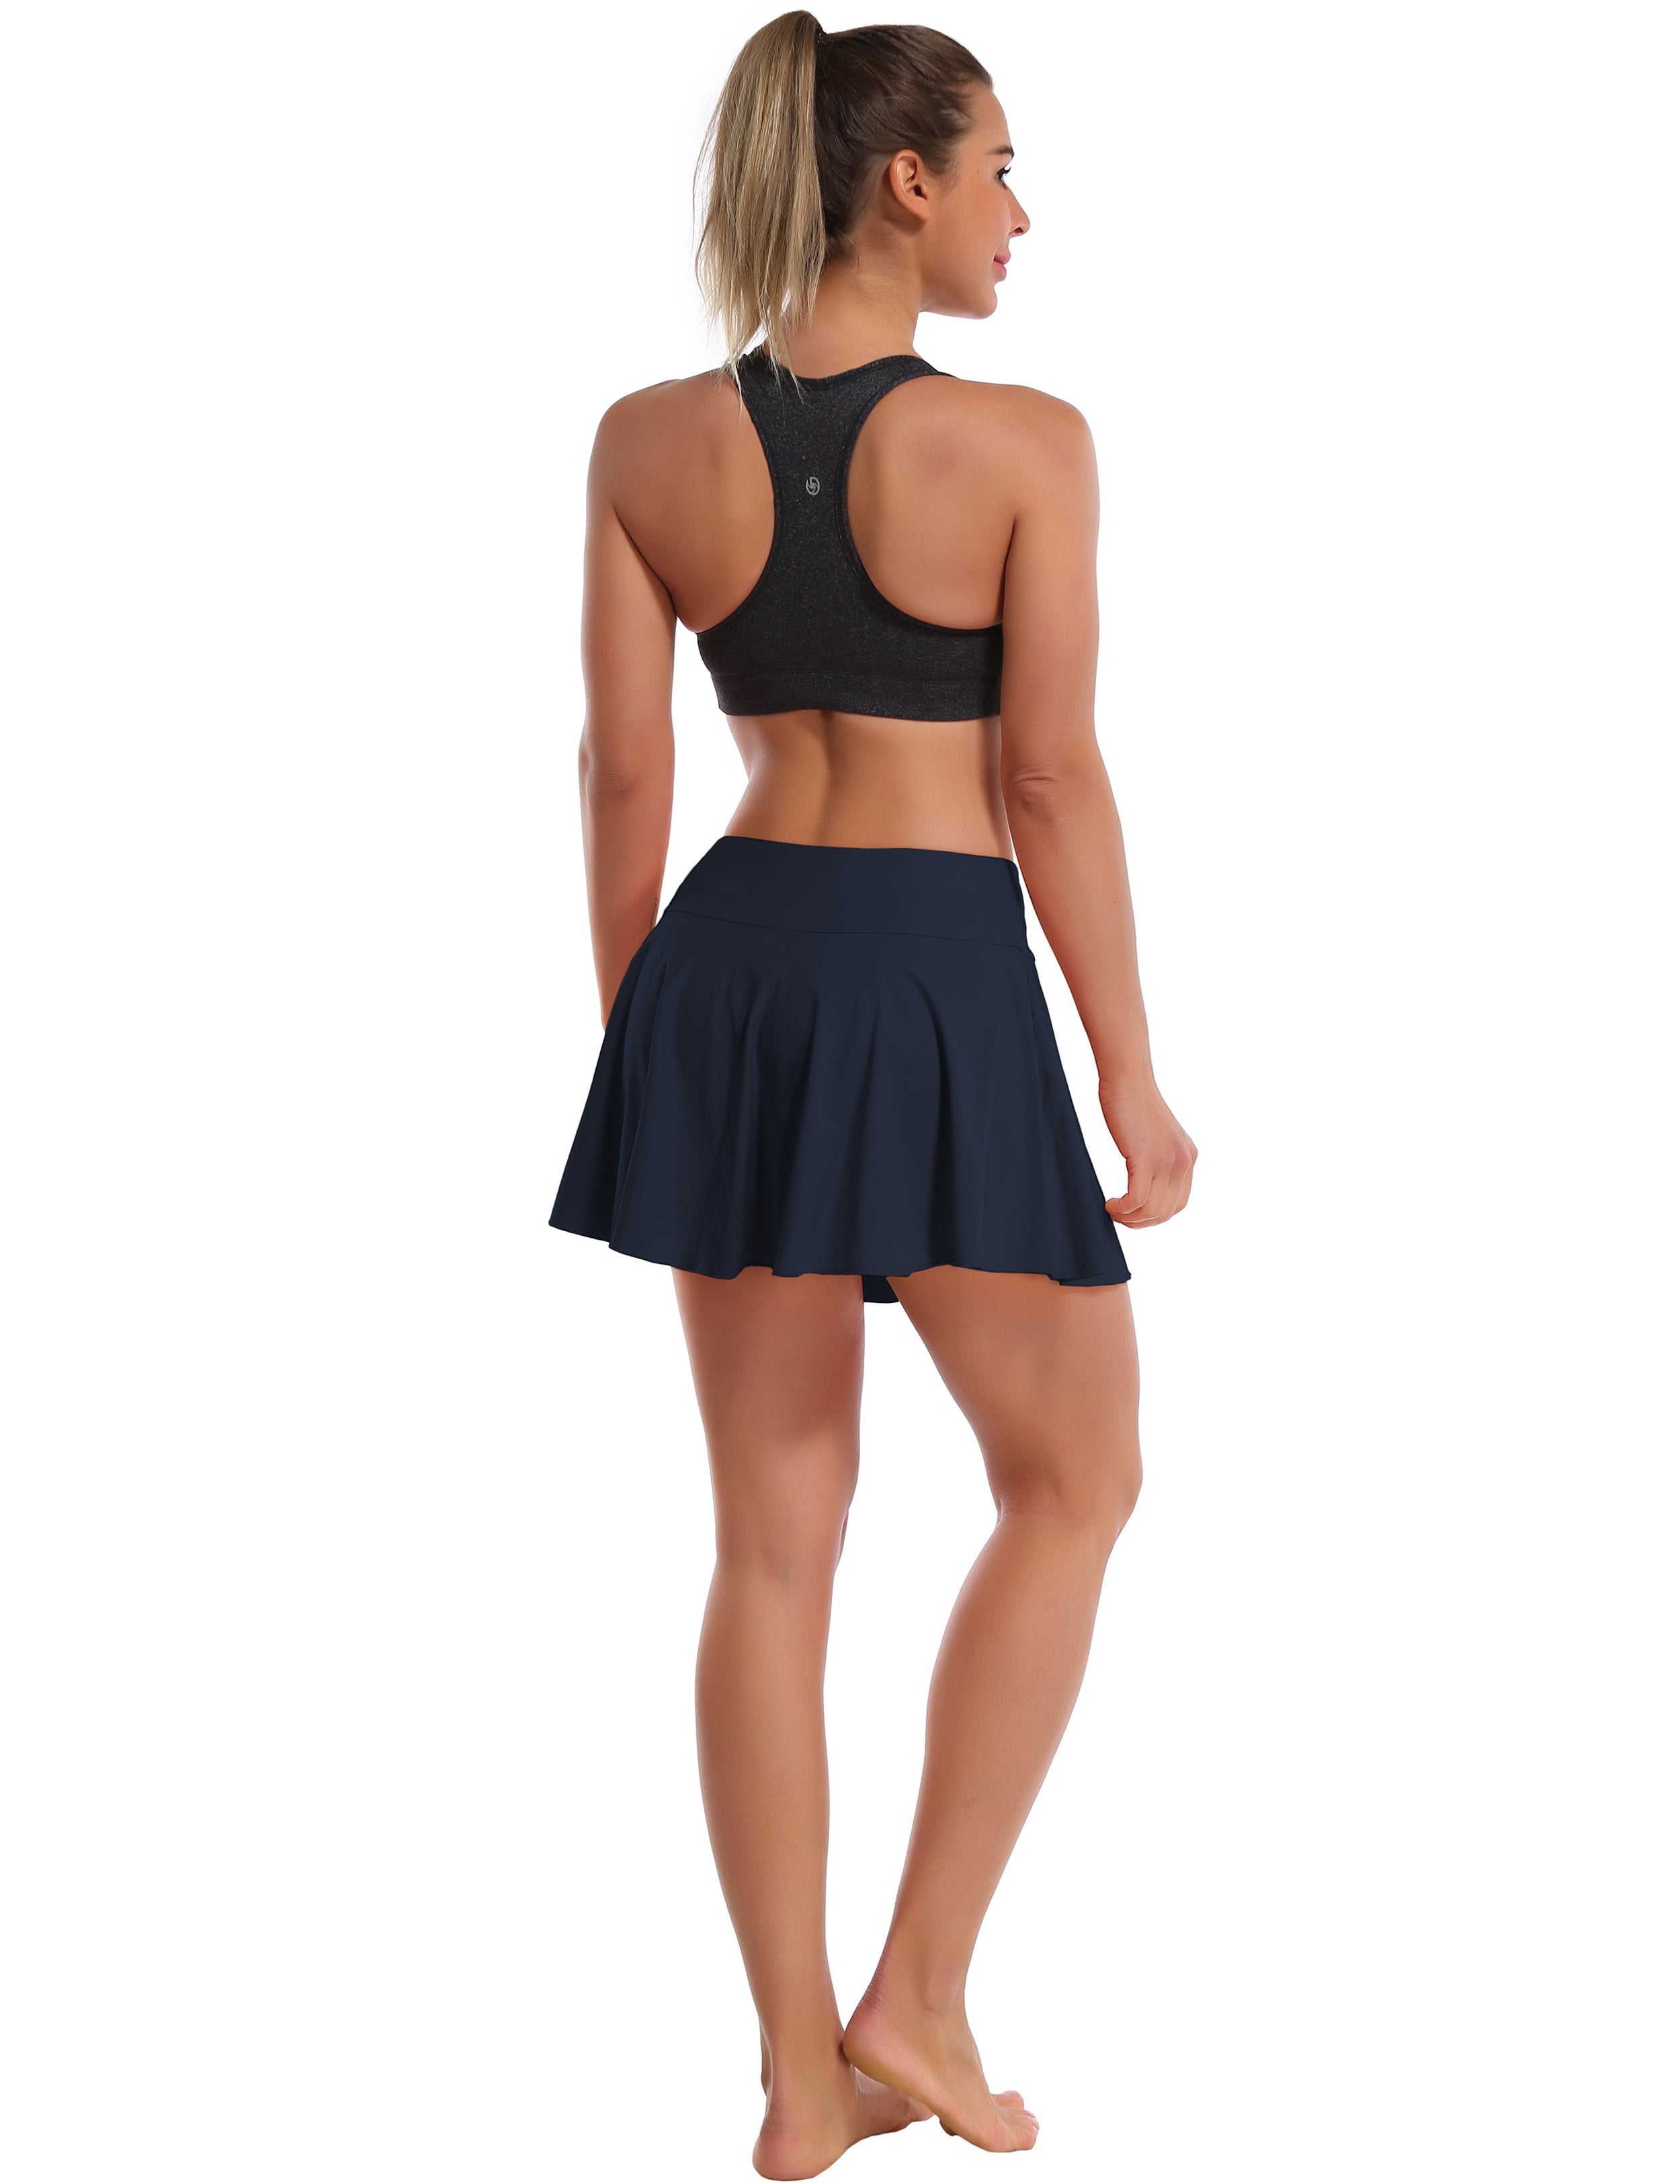 Athletic Tennis Golf Pleated Skort Awith Pocket Shorts darknavy 80%Nylon/20%Spandex UPF 50+ sun protection Elastic closure Lightweight, Wrinkle Moisture wicking Quick drying Secure & comfortable two layer Hidden pocket